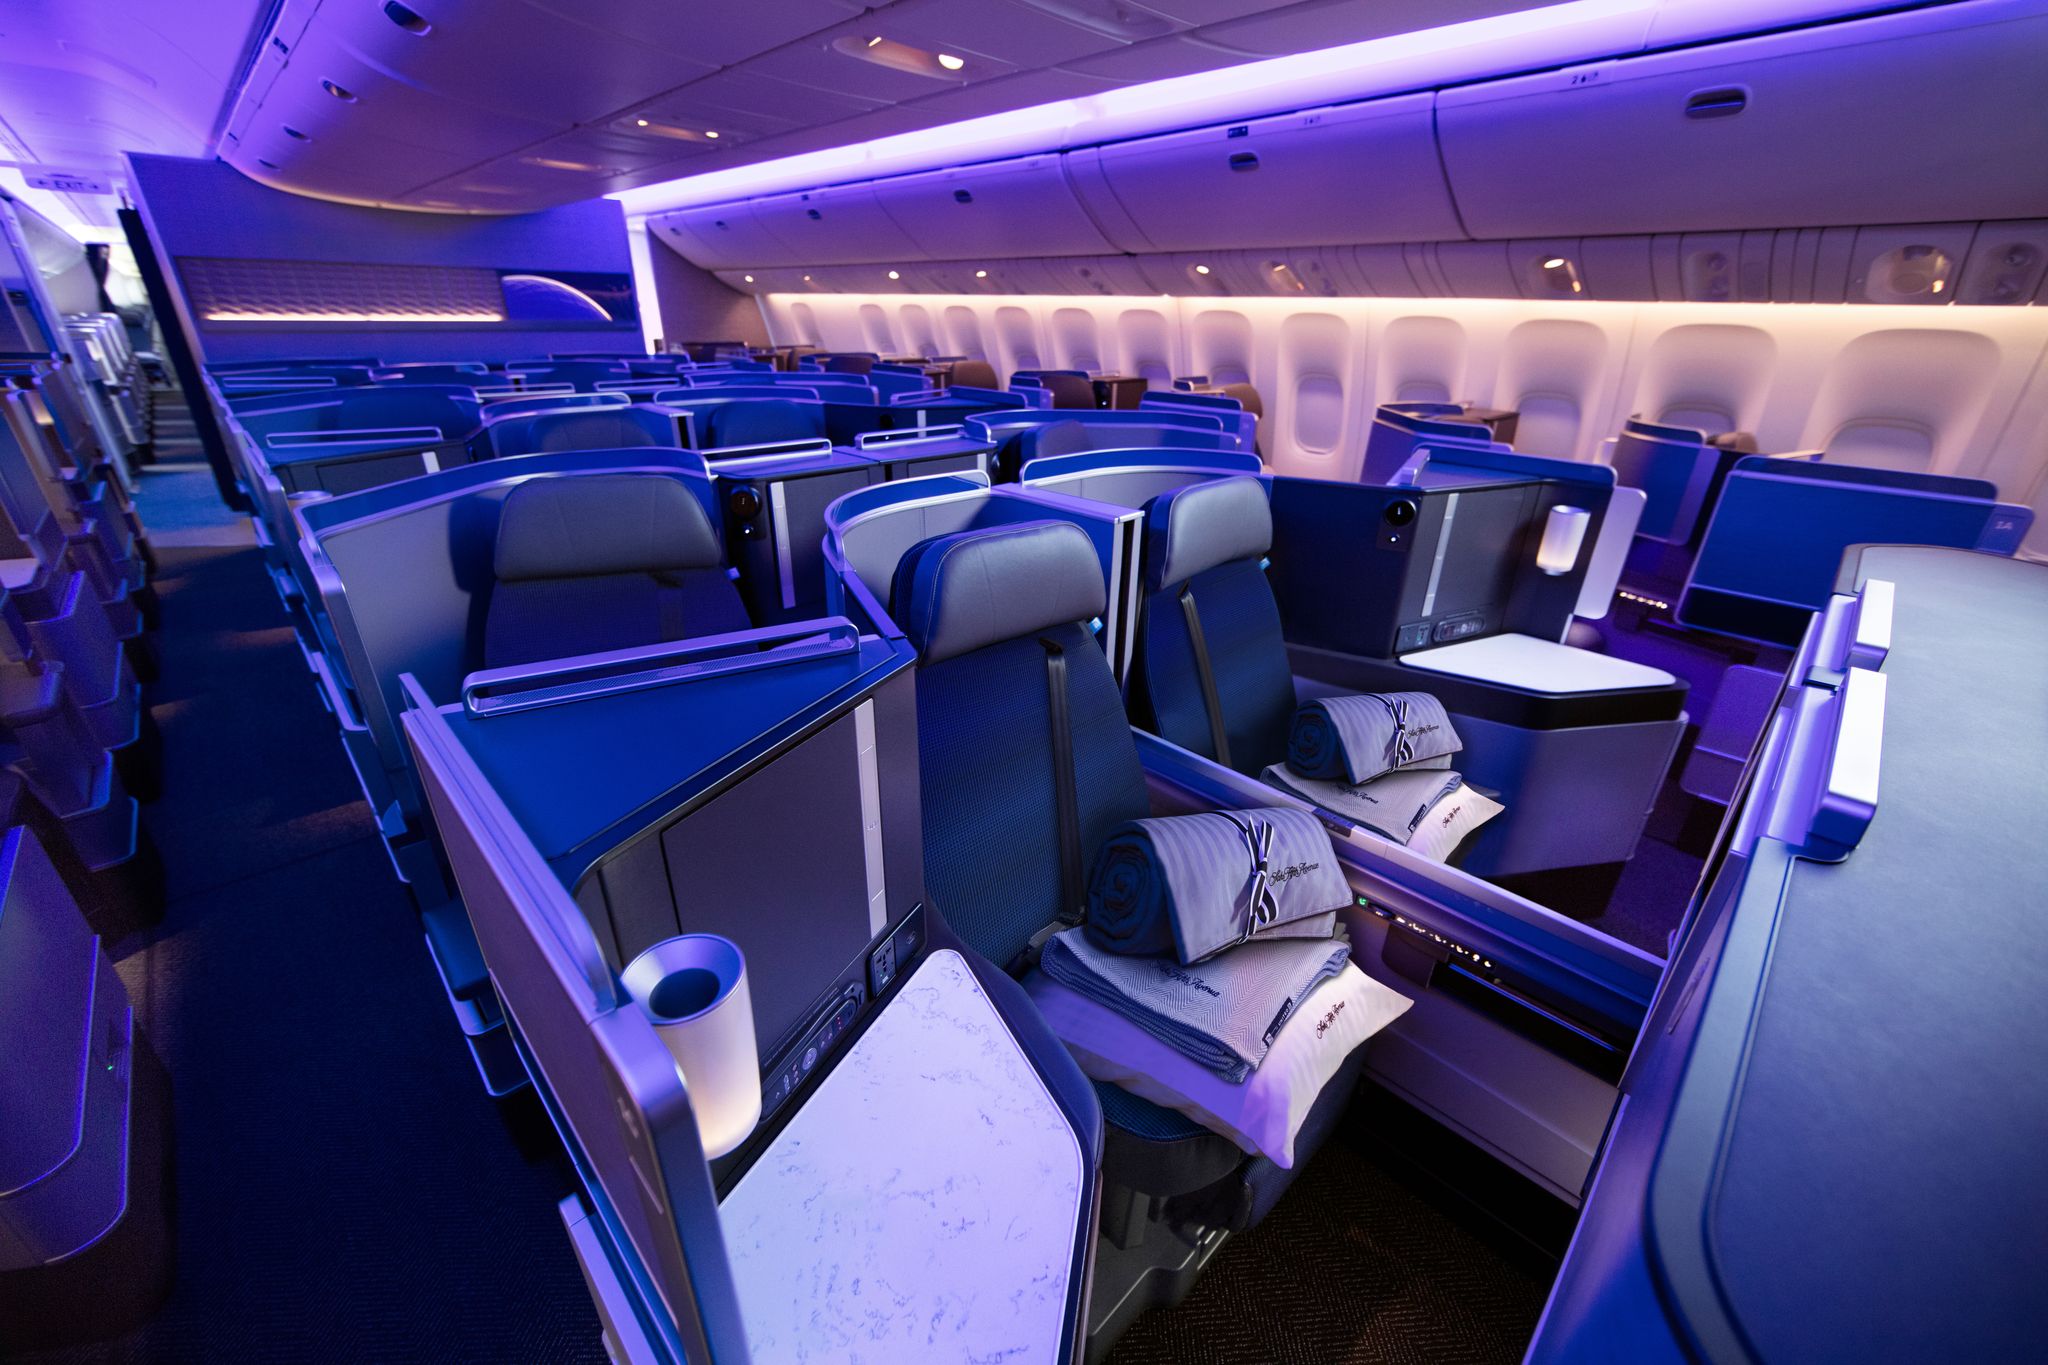 United Polaris Business Class: What to Know - NerdWallet